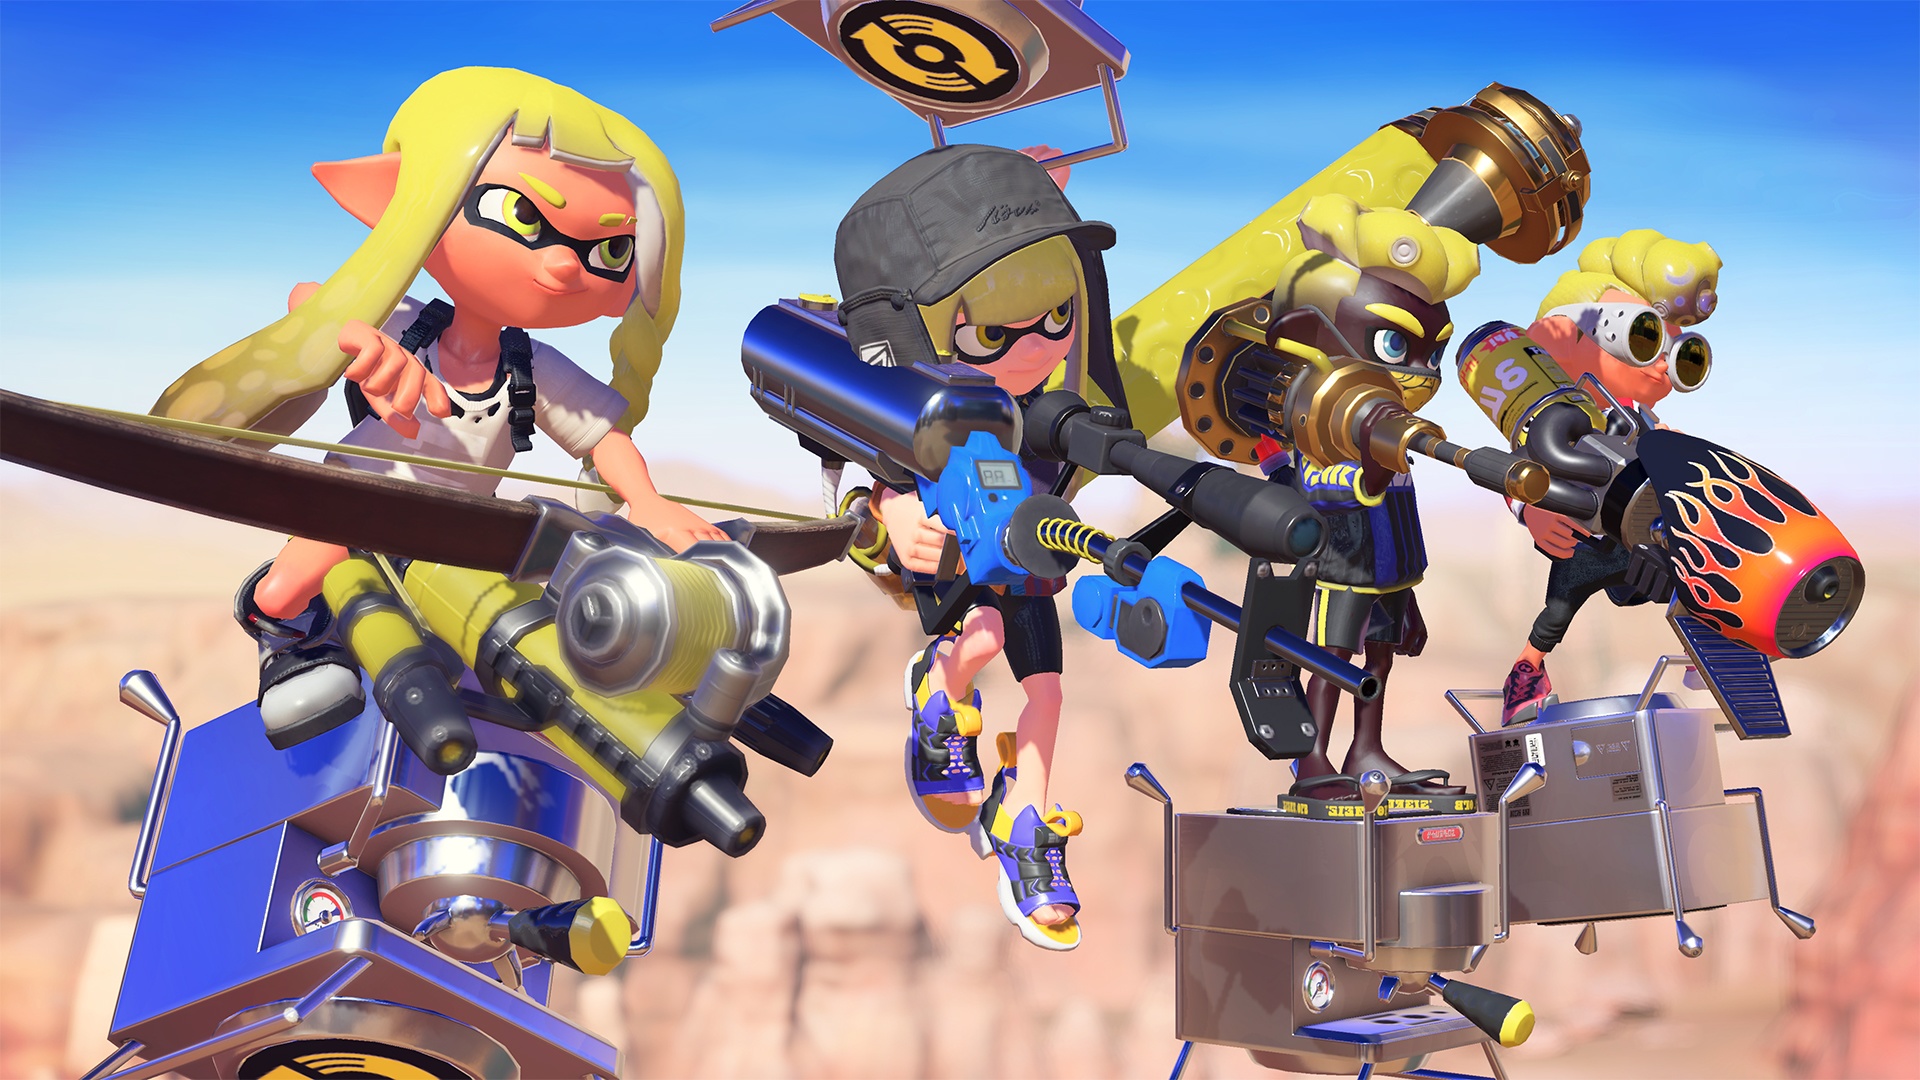 (In hardly any game is Gyro Aiming implemented as well as in Splatoon. (Image: Nintendo))